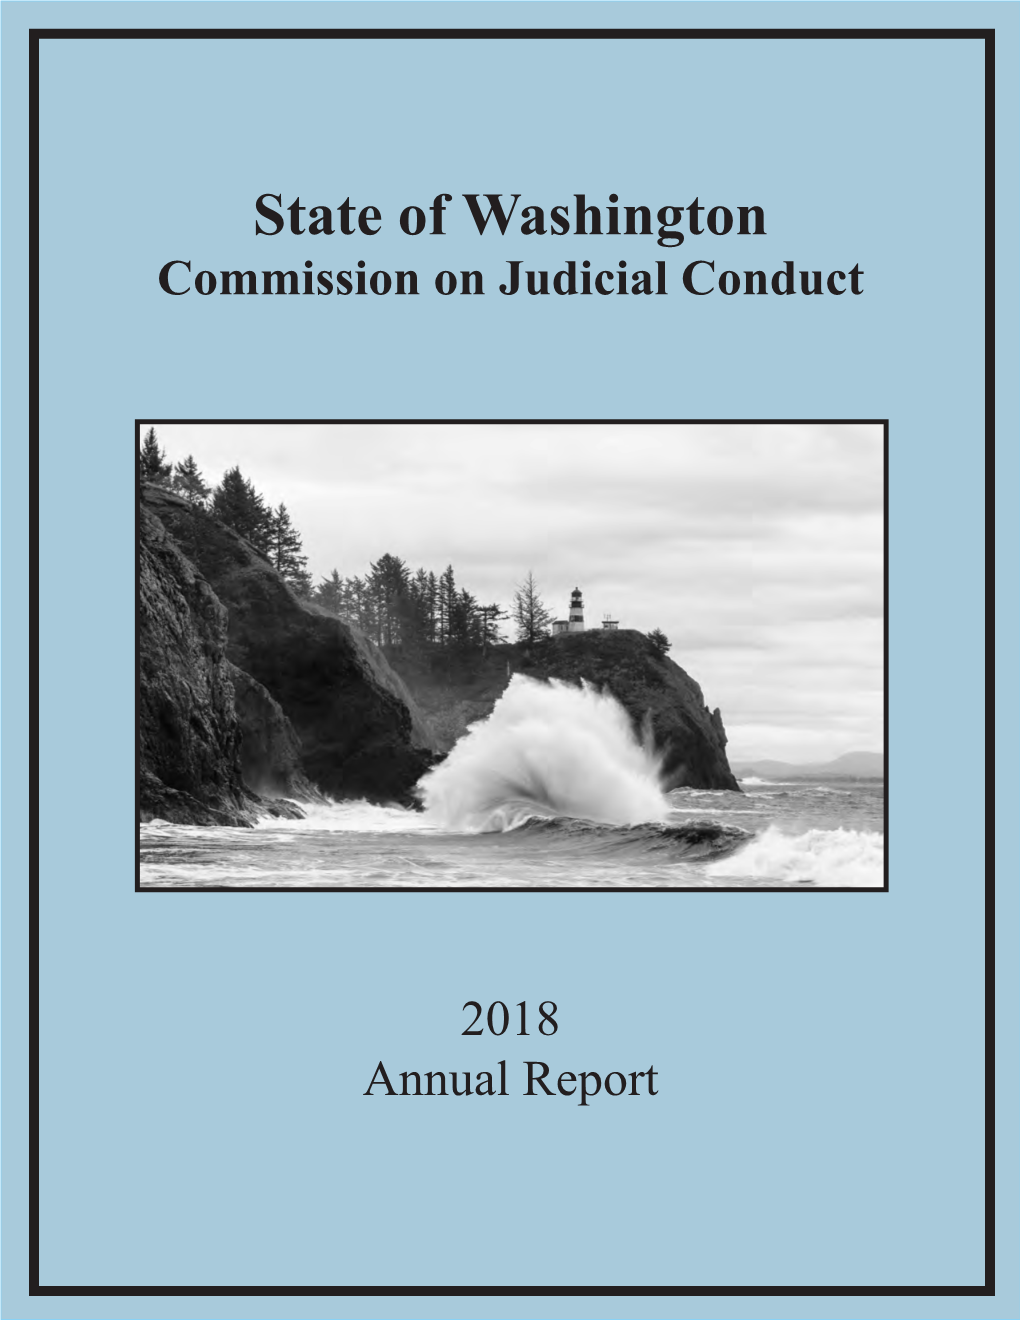 State of Washington Commission on Judicial Conduct